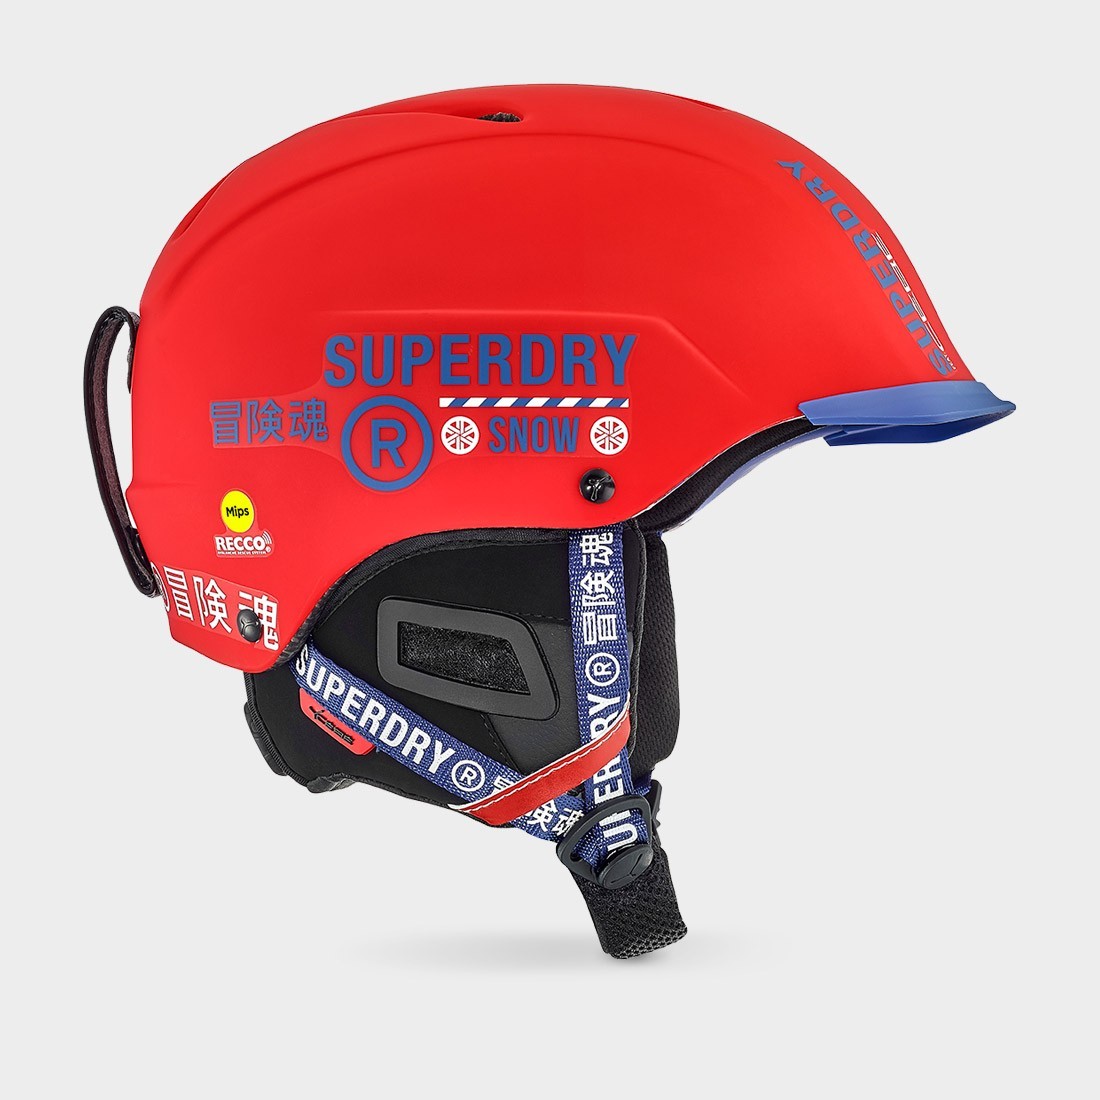 cebe-contest-visor-ultimate-mips-x-superdry-casque-ski-performance-mips-rouge